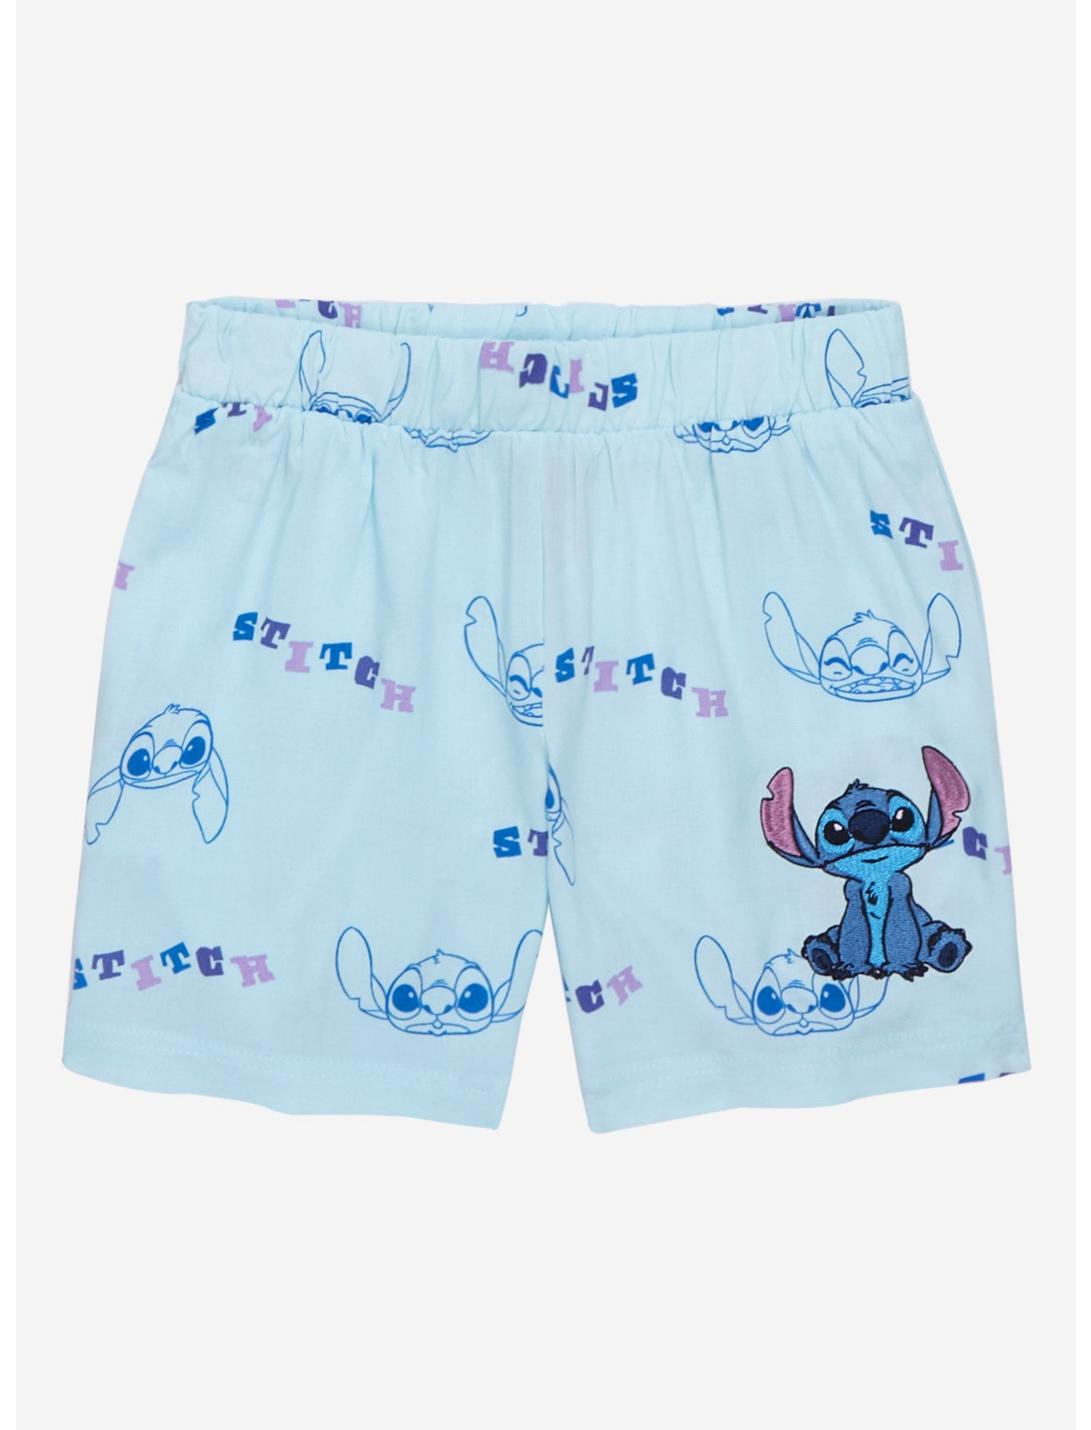 Disney Lilo & Stitch Expressions Toddler Woven Shorts - BoxLunch Exclusive, BABY BLUE, hi-res